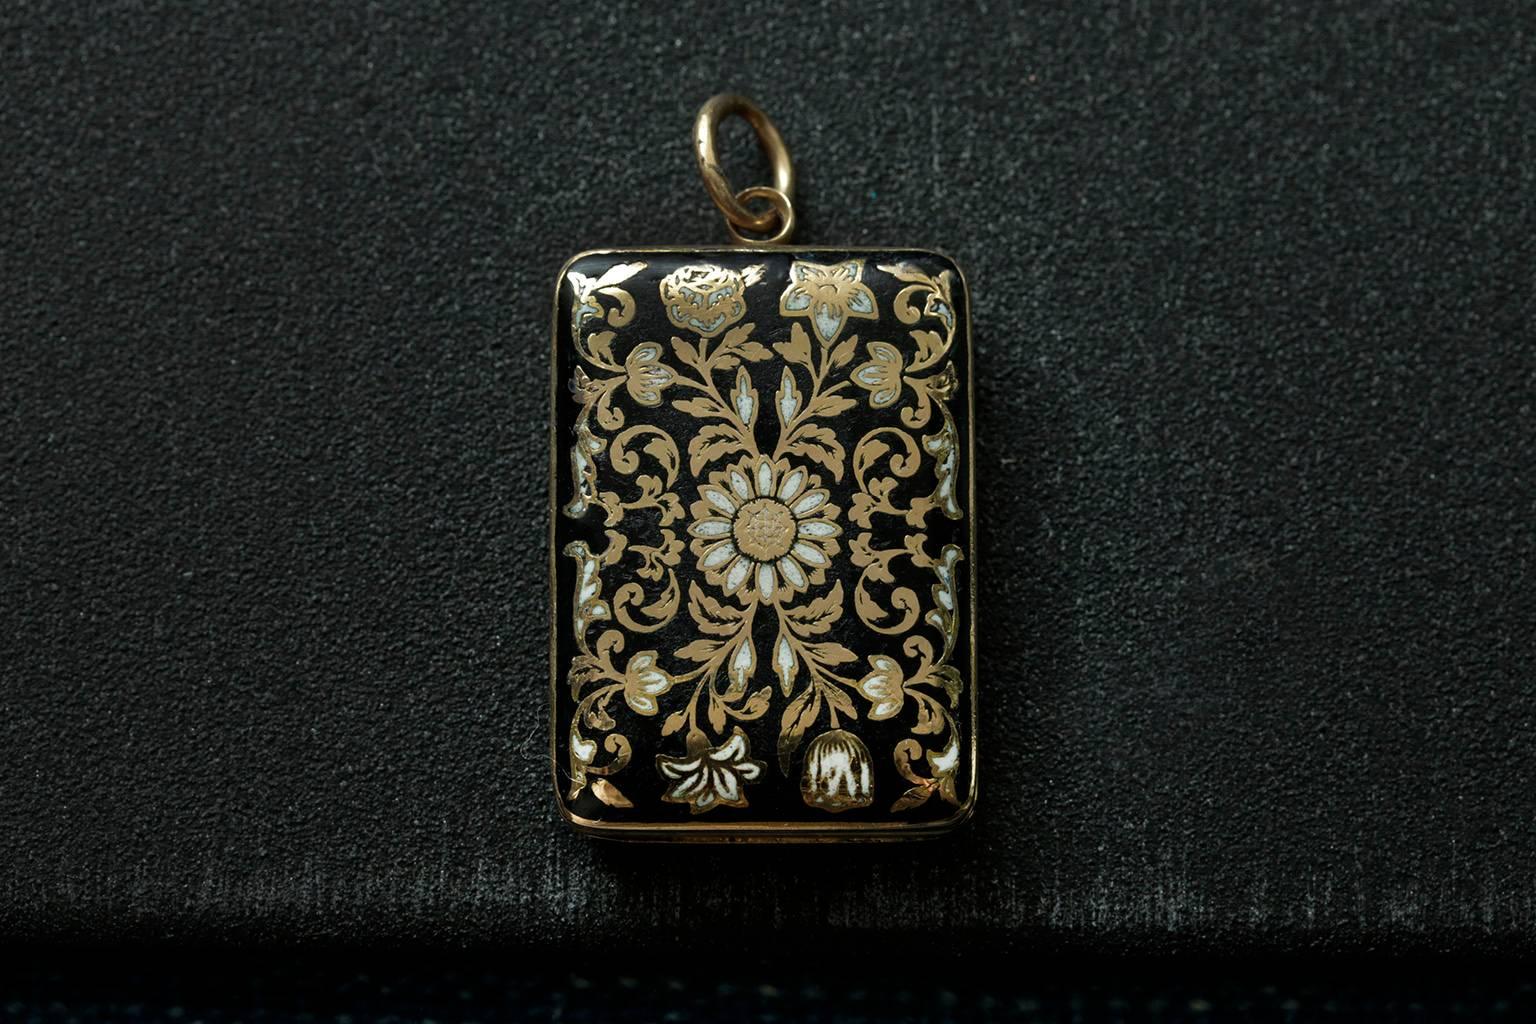 A beautiful early 19th century black and white enamel vinaigrette pendant. The vinaigrette is in shape of a book, and the fine workmanship shows the floral enamel decoration on both sides. The hand cut mesh plate is in good working order fitting